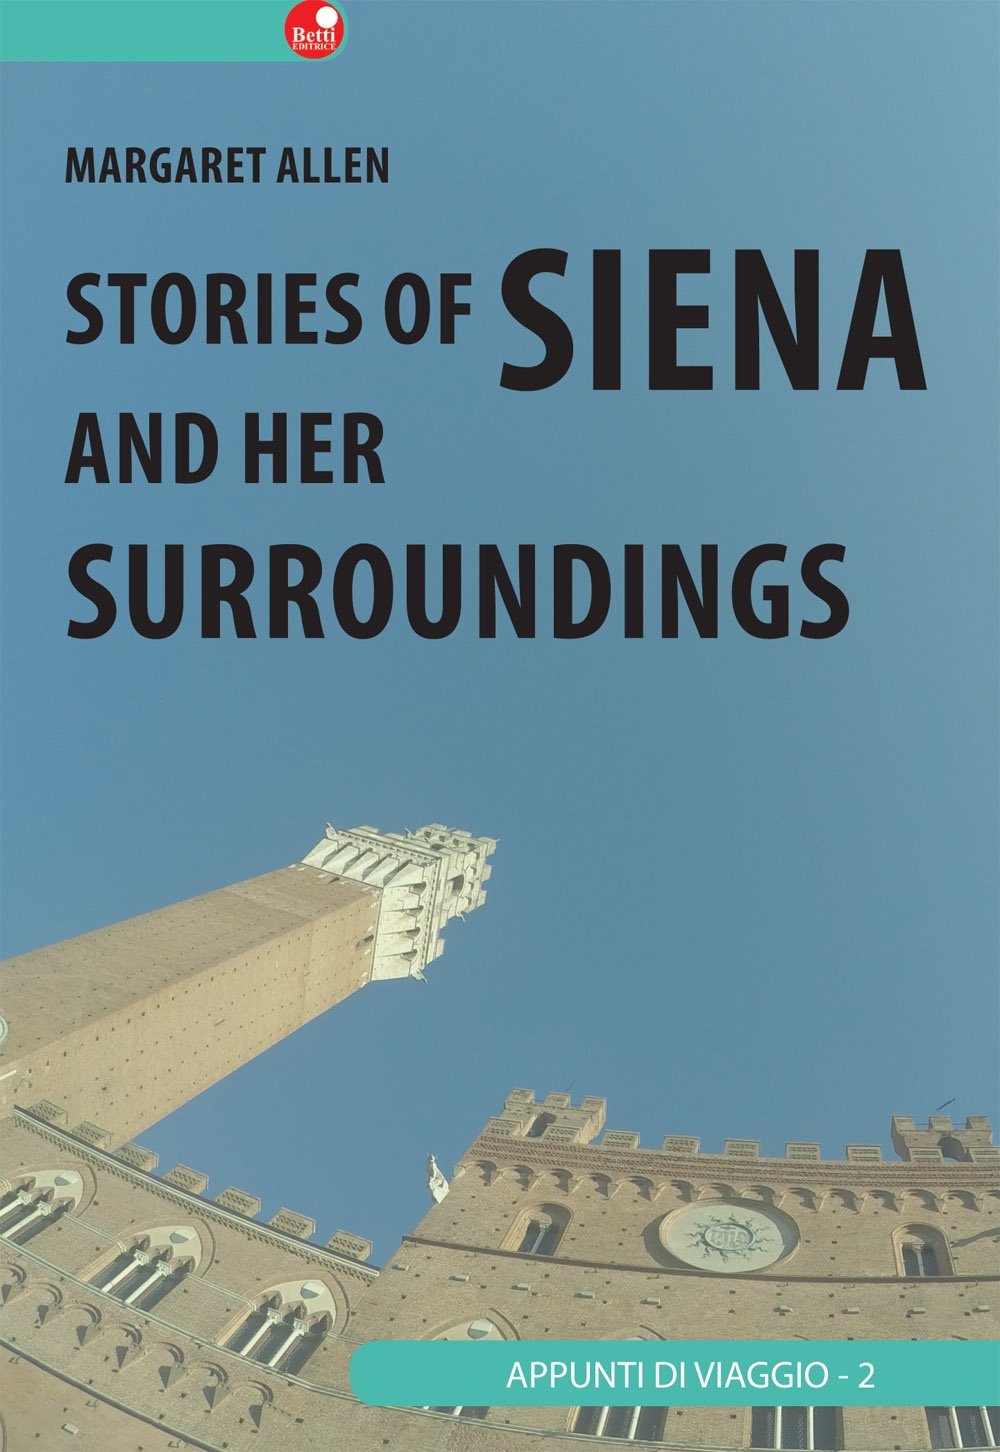 Stories of siena and her surrondings